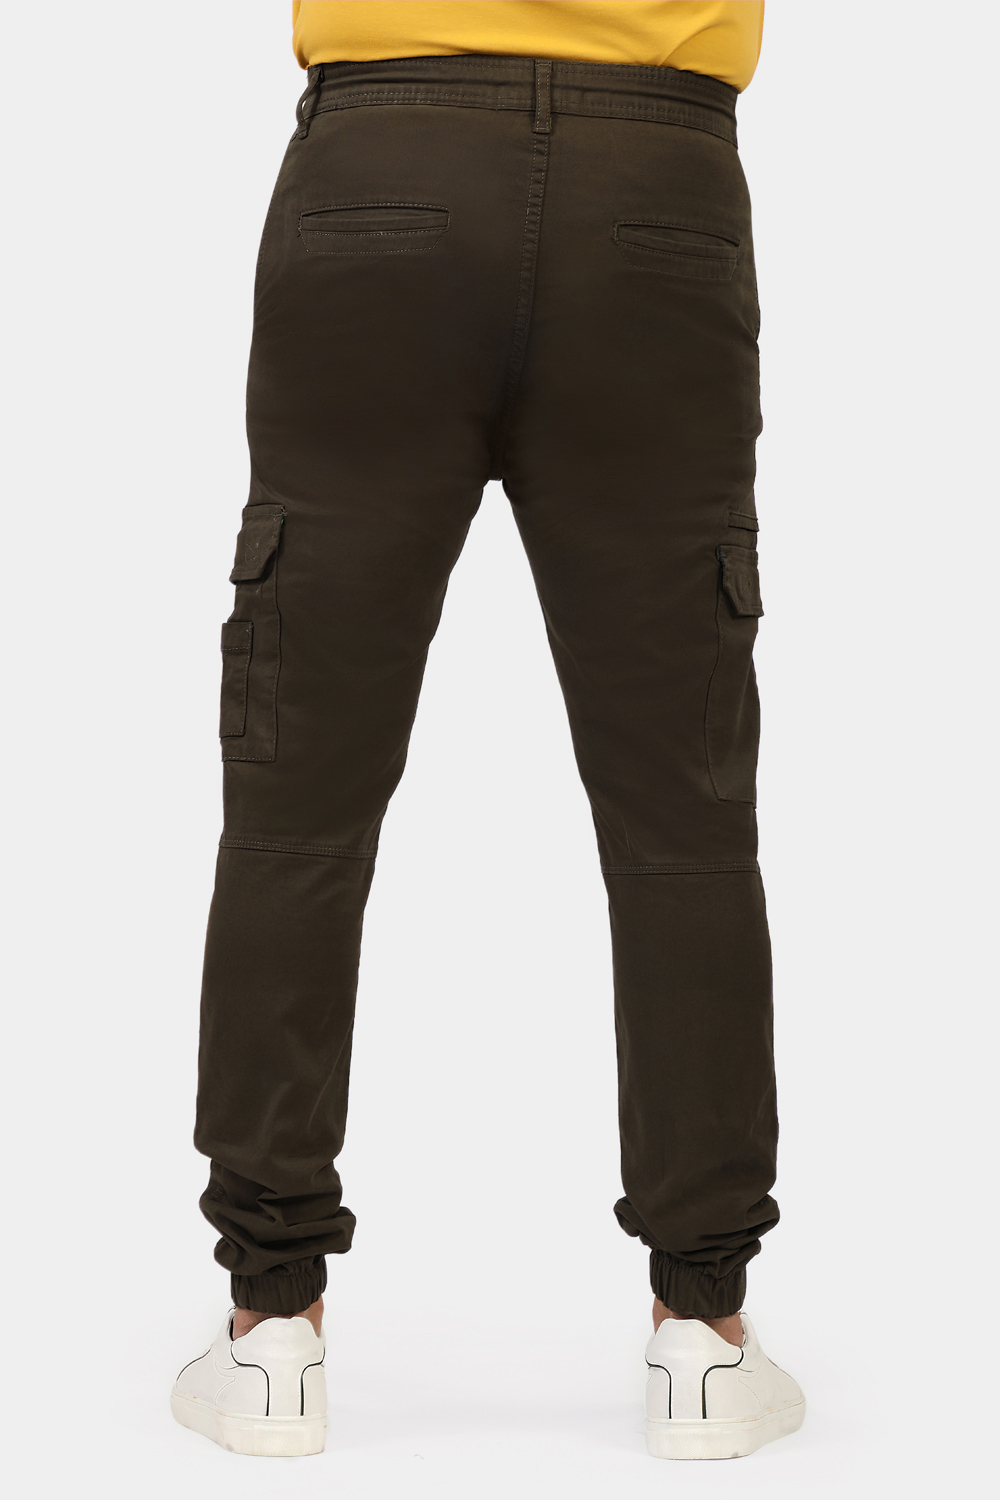 Slim Fit Chino Green - TIE HOUSE